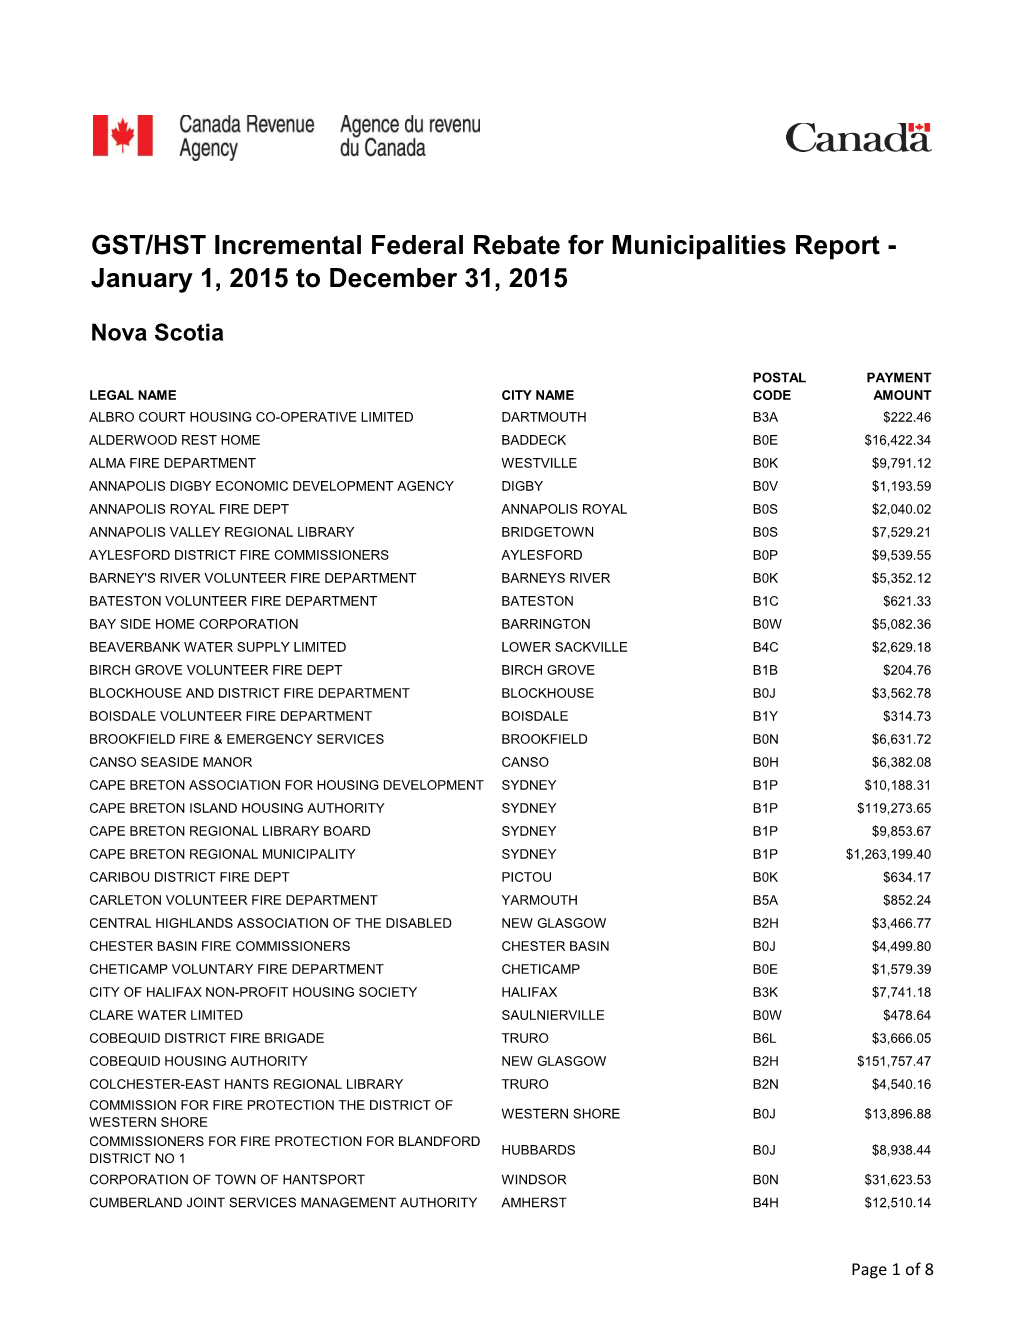 GST/HST Incremental Federal Rebate for Municipalities Report - January 1, 2015 to December 31, 2015